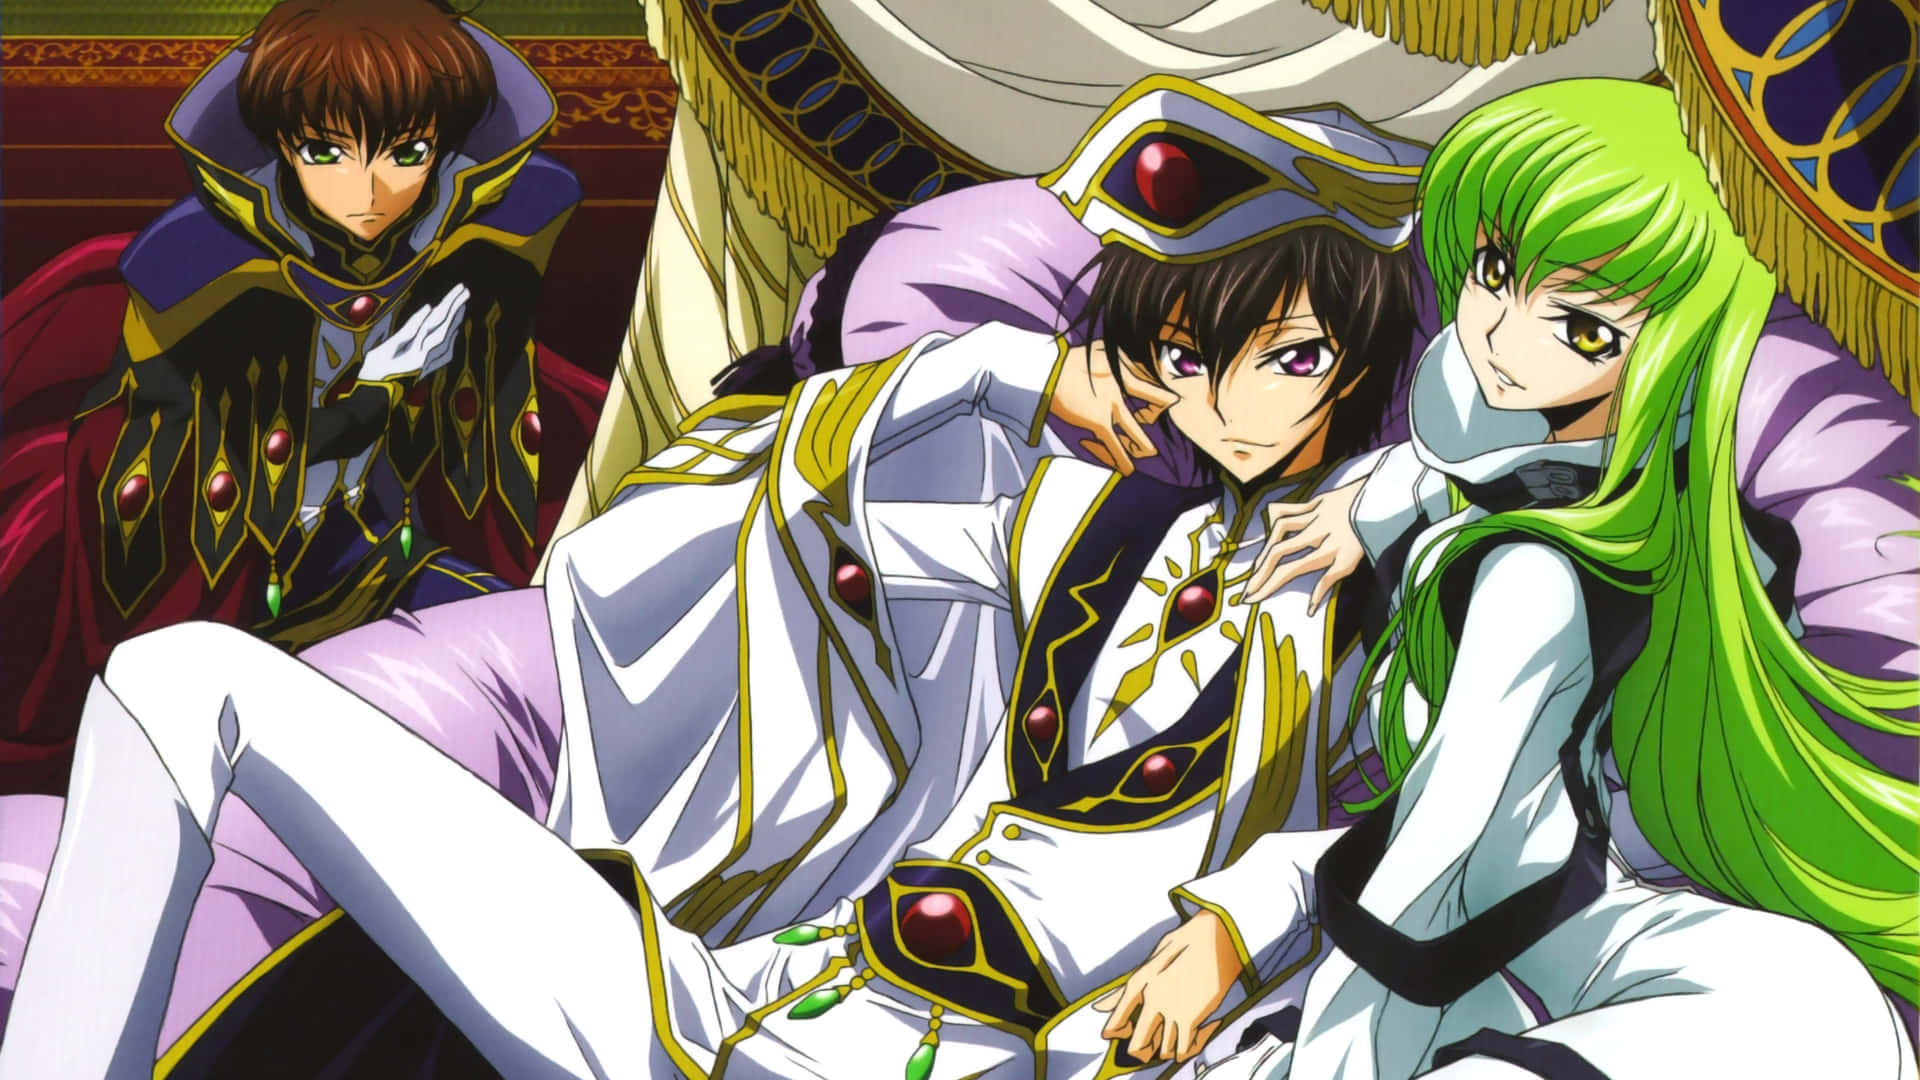 Download Code Geass Lelouch And C.C On The Throne Picture | Wallpapers.com